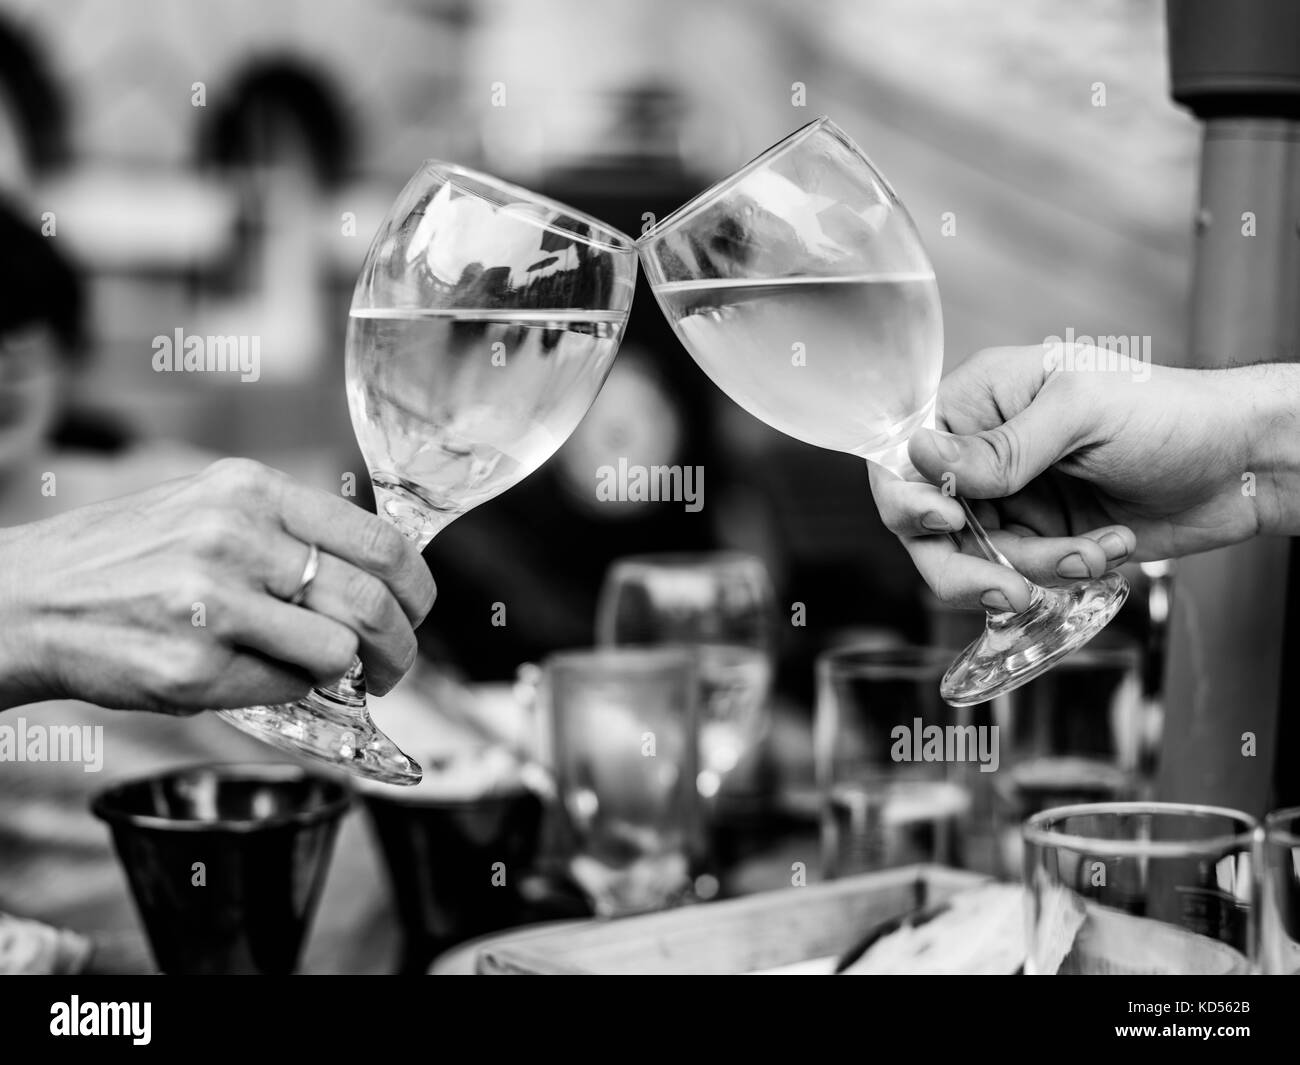 Black and White Monochrome Image of Celebrating Success With Two Raised Glasses of White Wine Across a Table In an Outside or Ourdoors Setting Stock Photo